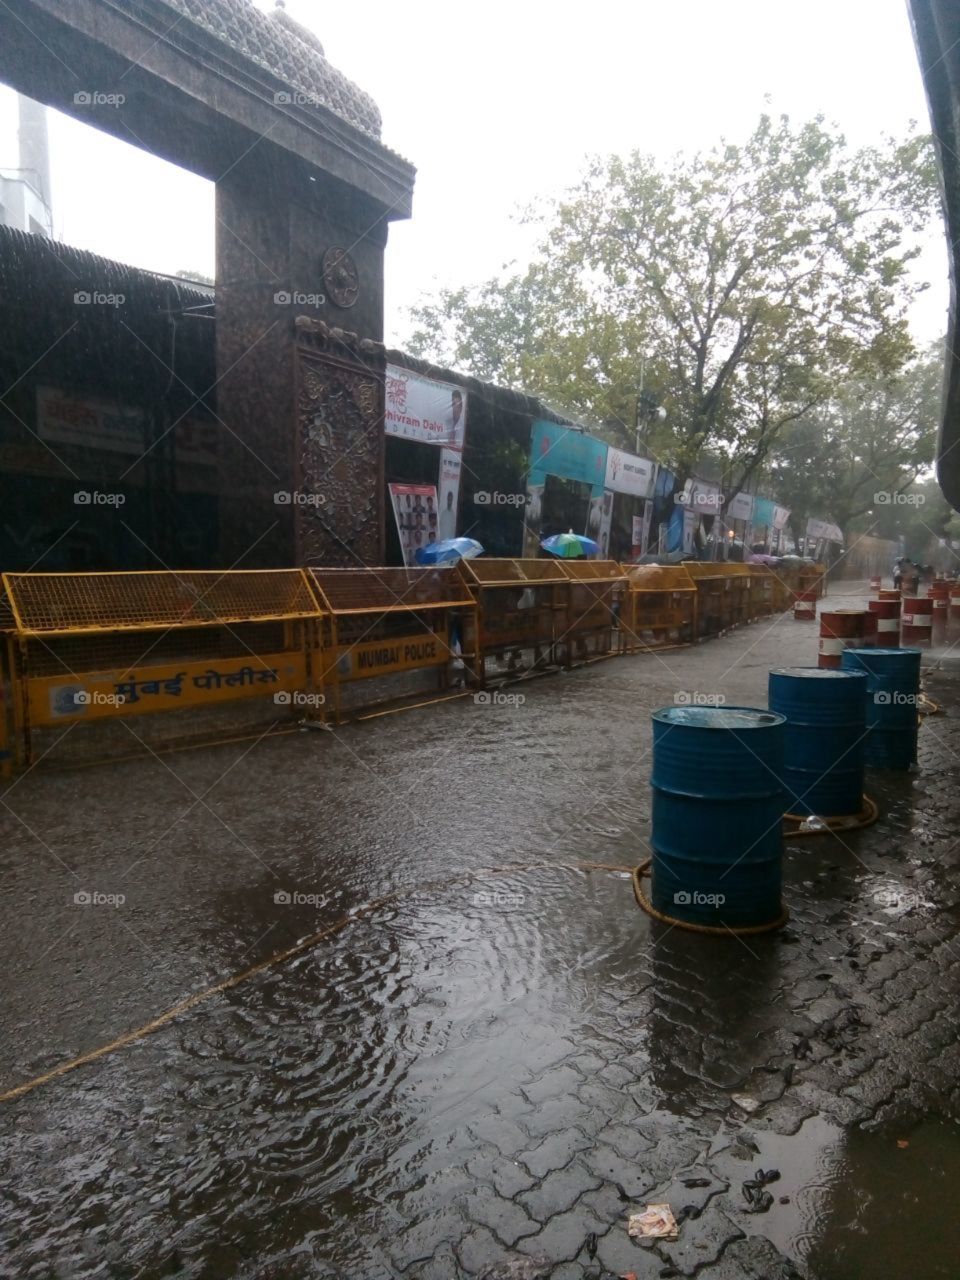 The 2017 Mumbai Flood refers to the flooding that occurred on August 29, 2017 following heavy rain on 29 August 2017 in Mumbai. Transport systems were unavailable through parts of the city as trains and roadways were shut. Power was cut-off from various parts of the city to prevent electrocution.[1] The International Federation of Red Cross and Red Crescent Societies (IFRC) called the South Asian floods one of the worst regional humanitarian crises in years.[2] This event can be referred in comparison with the 2005 floods in Mumbai which recorded 944 mm (37.17 inches) of rainfall within 24 hours on 26 July 2005.